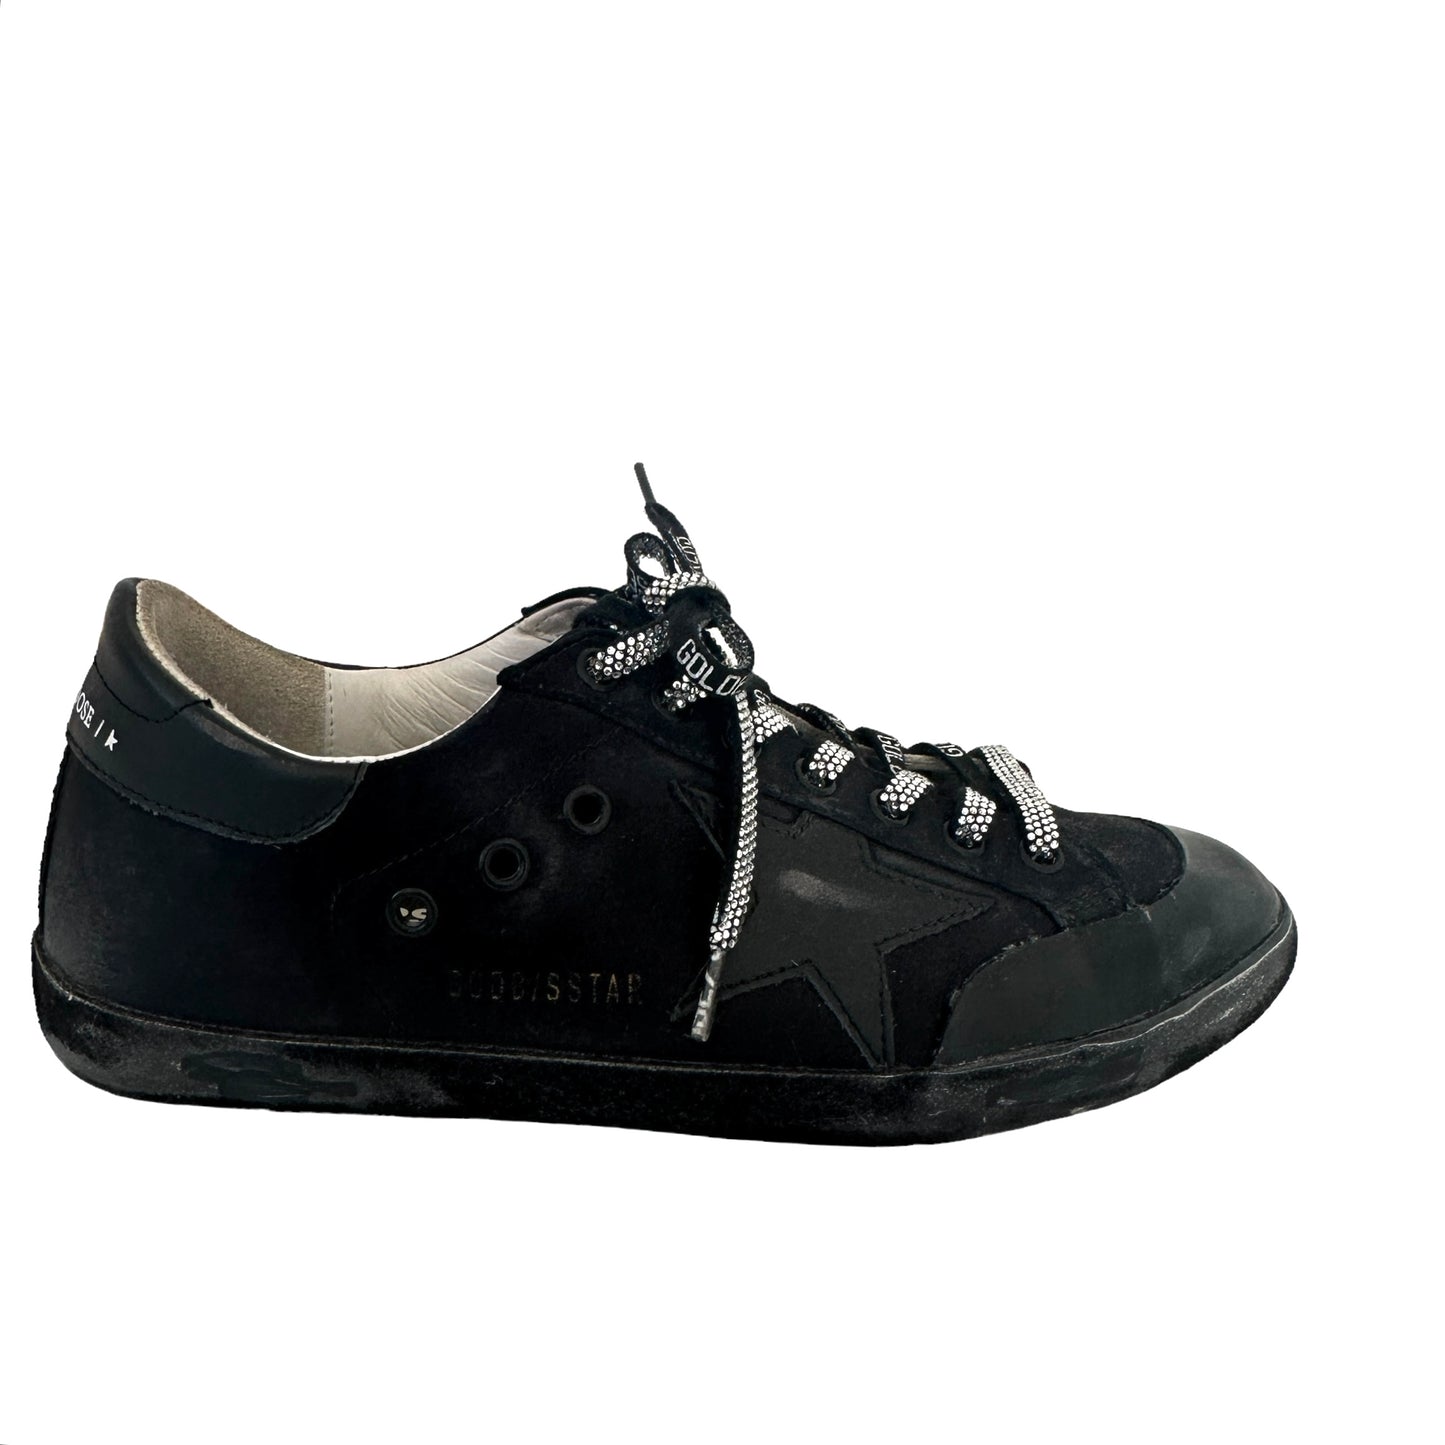 Black Leather & Crystals Sneakers - 9